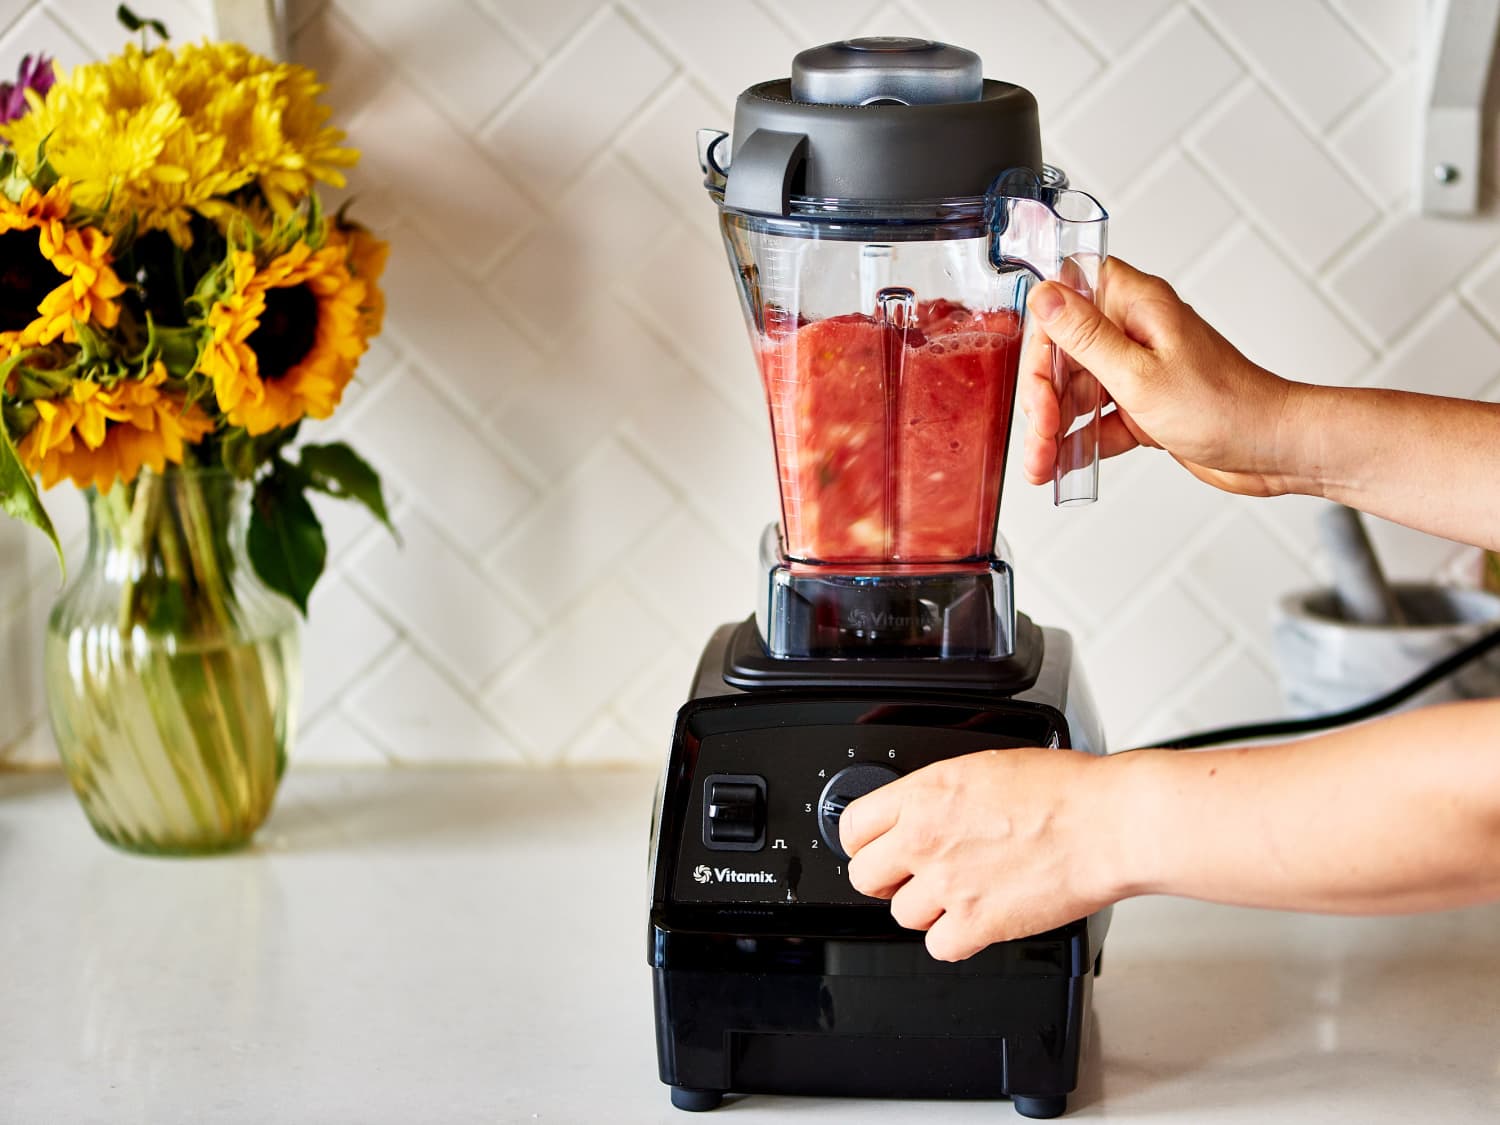 Vitamix Prime Day deals deliver pro-grade blenders with lengthy